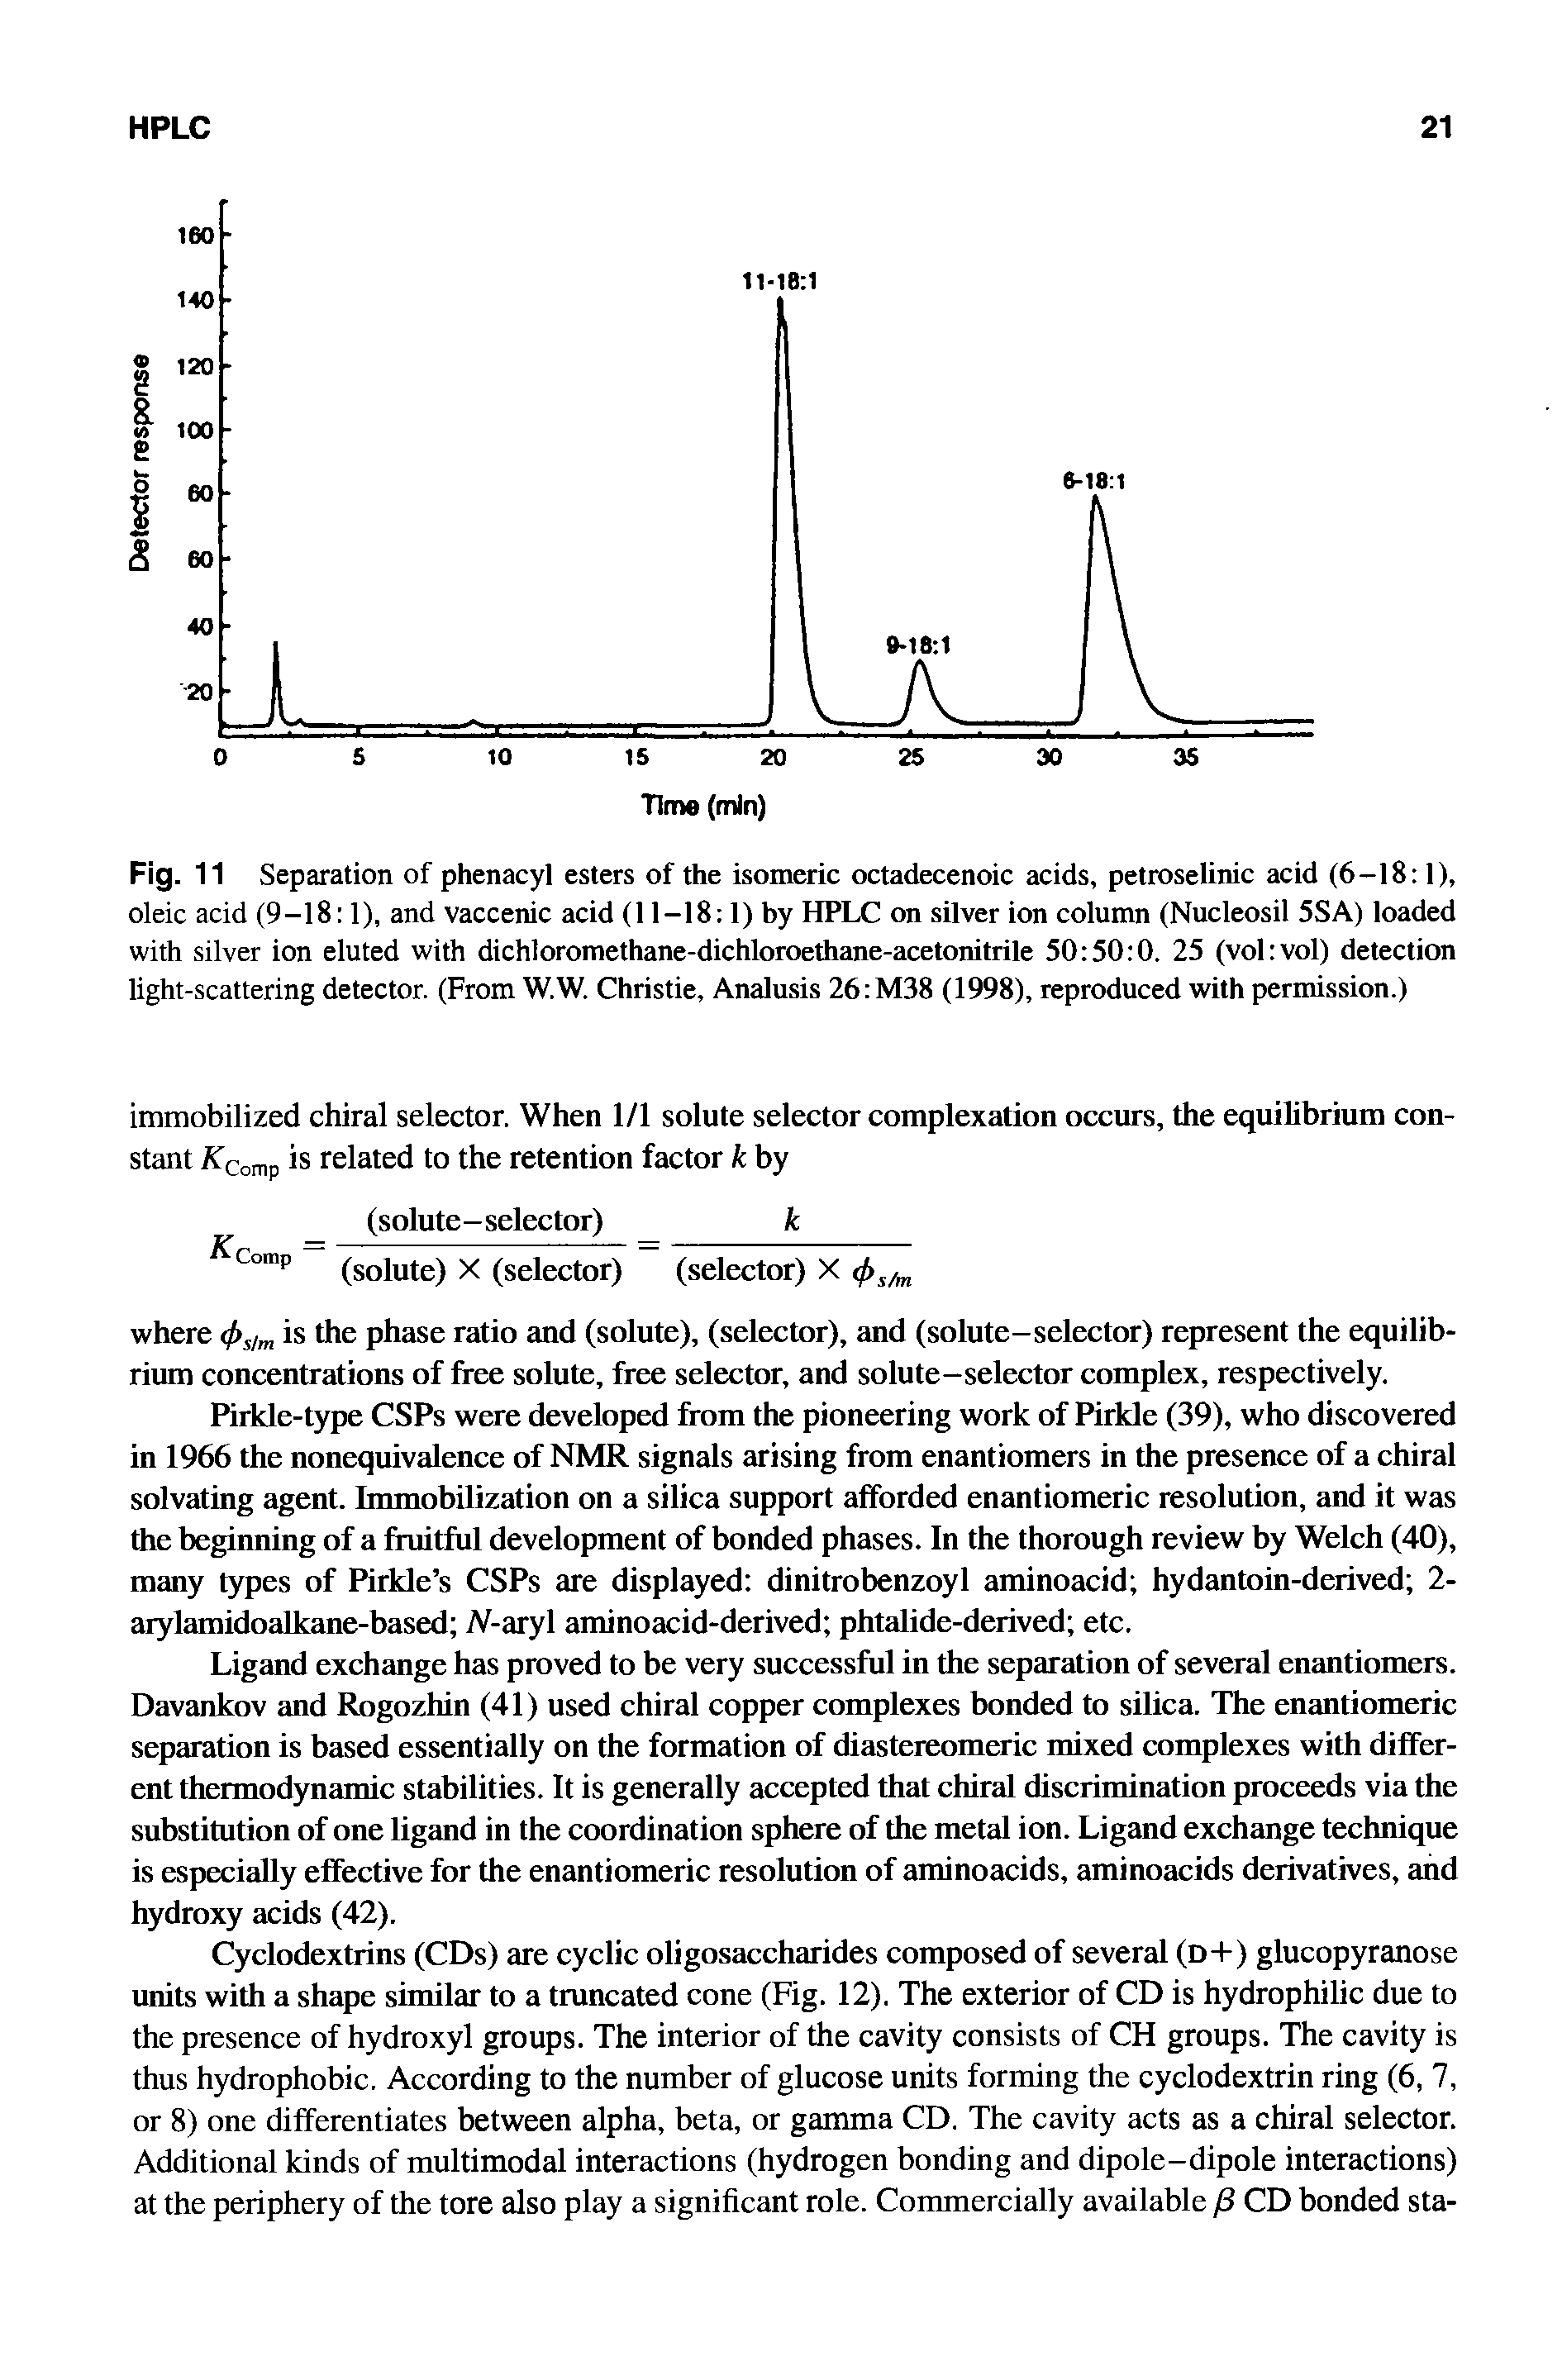 Fig. 11 Separation of phenacyl esters of the isomeric octadecenoic acids, petroselinic acid (6-18 1), oleic acid (9-18 1), and vaccenic acid (11-18 1) by HPLC on silver ion column (Nucleosil 5SA) loaded with silver ion eluted with dichloromethane-dichloroethane-acetonitrile 50 50 0. 25 (vol vol) detection light-scattering detector. (From W.W. Christie, Analusis 26 M38 (1998), reproduced with permission.)...